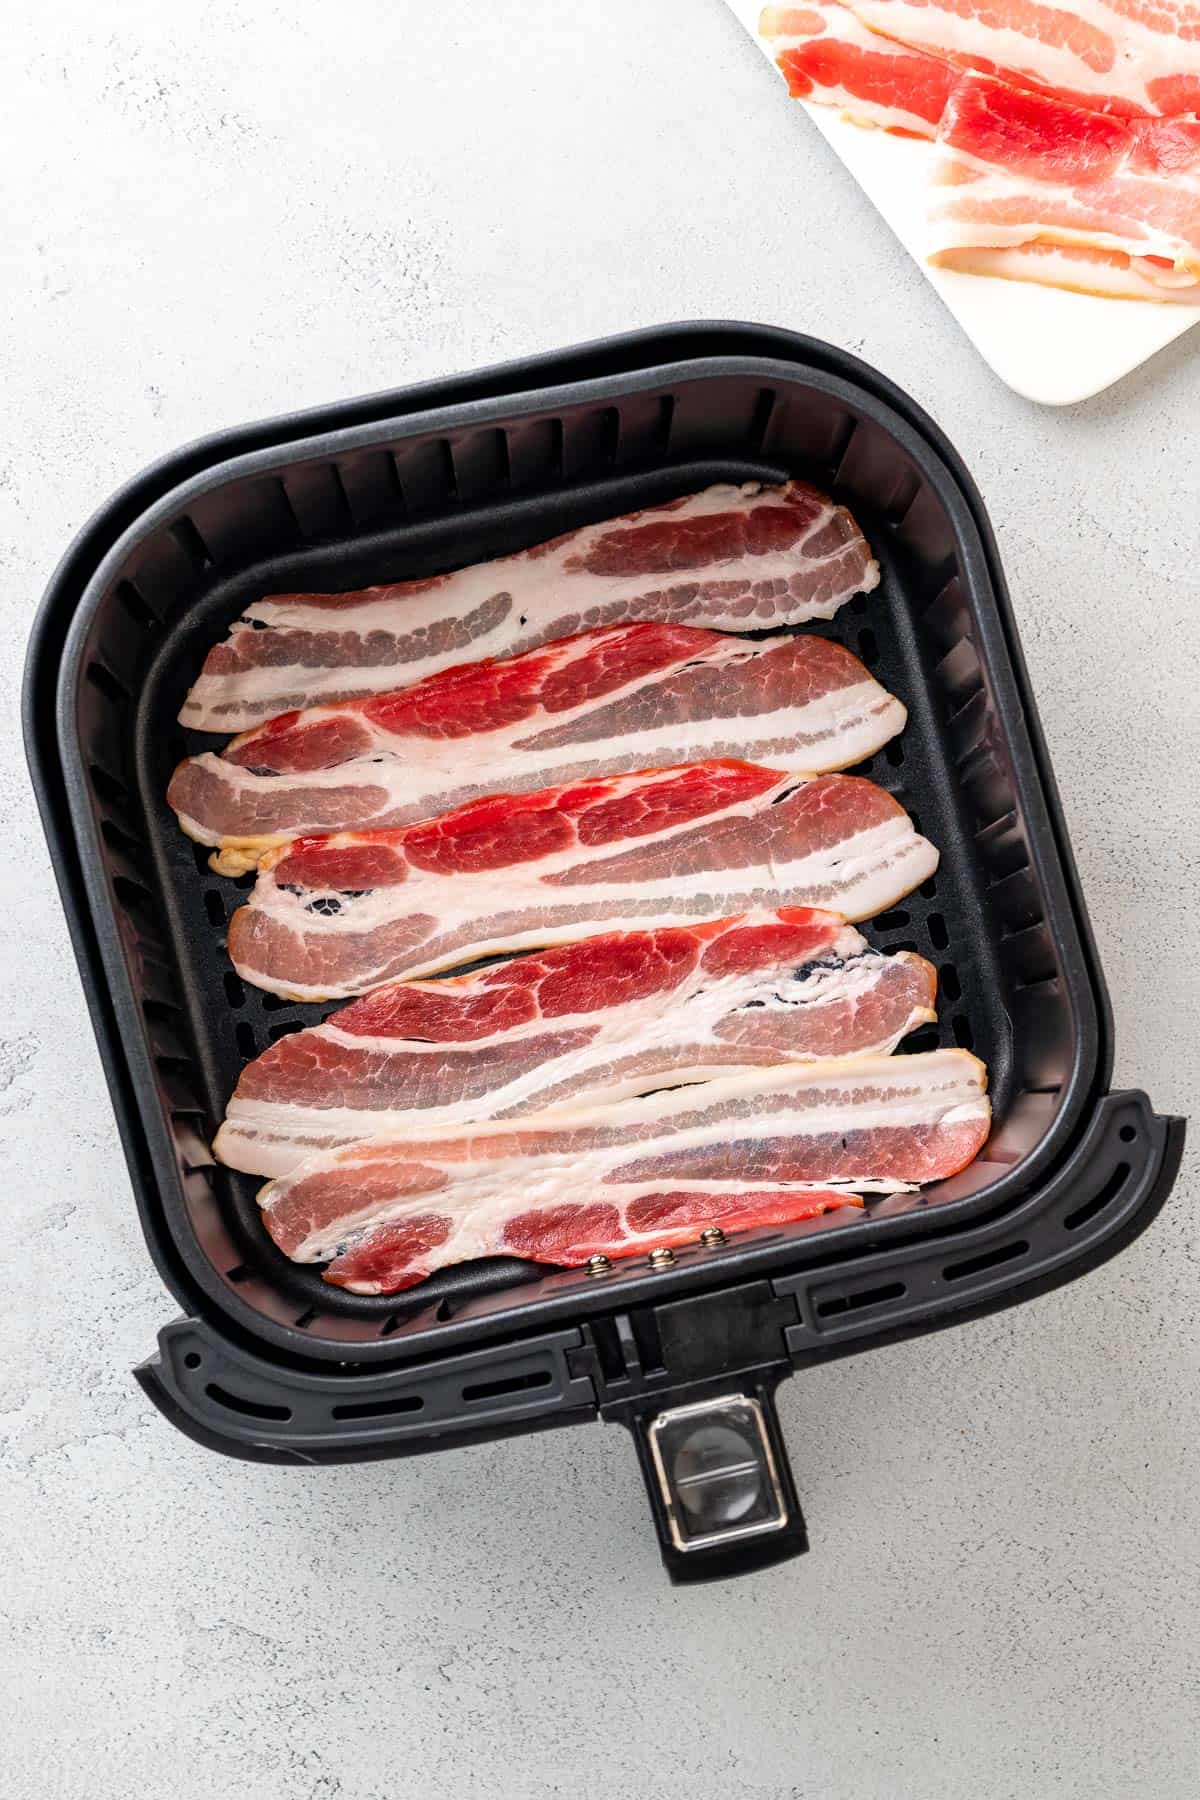 raw strips of bacon laid out in neat rows in the air fryer basket